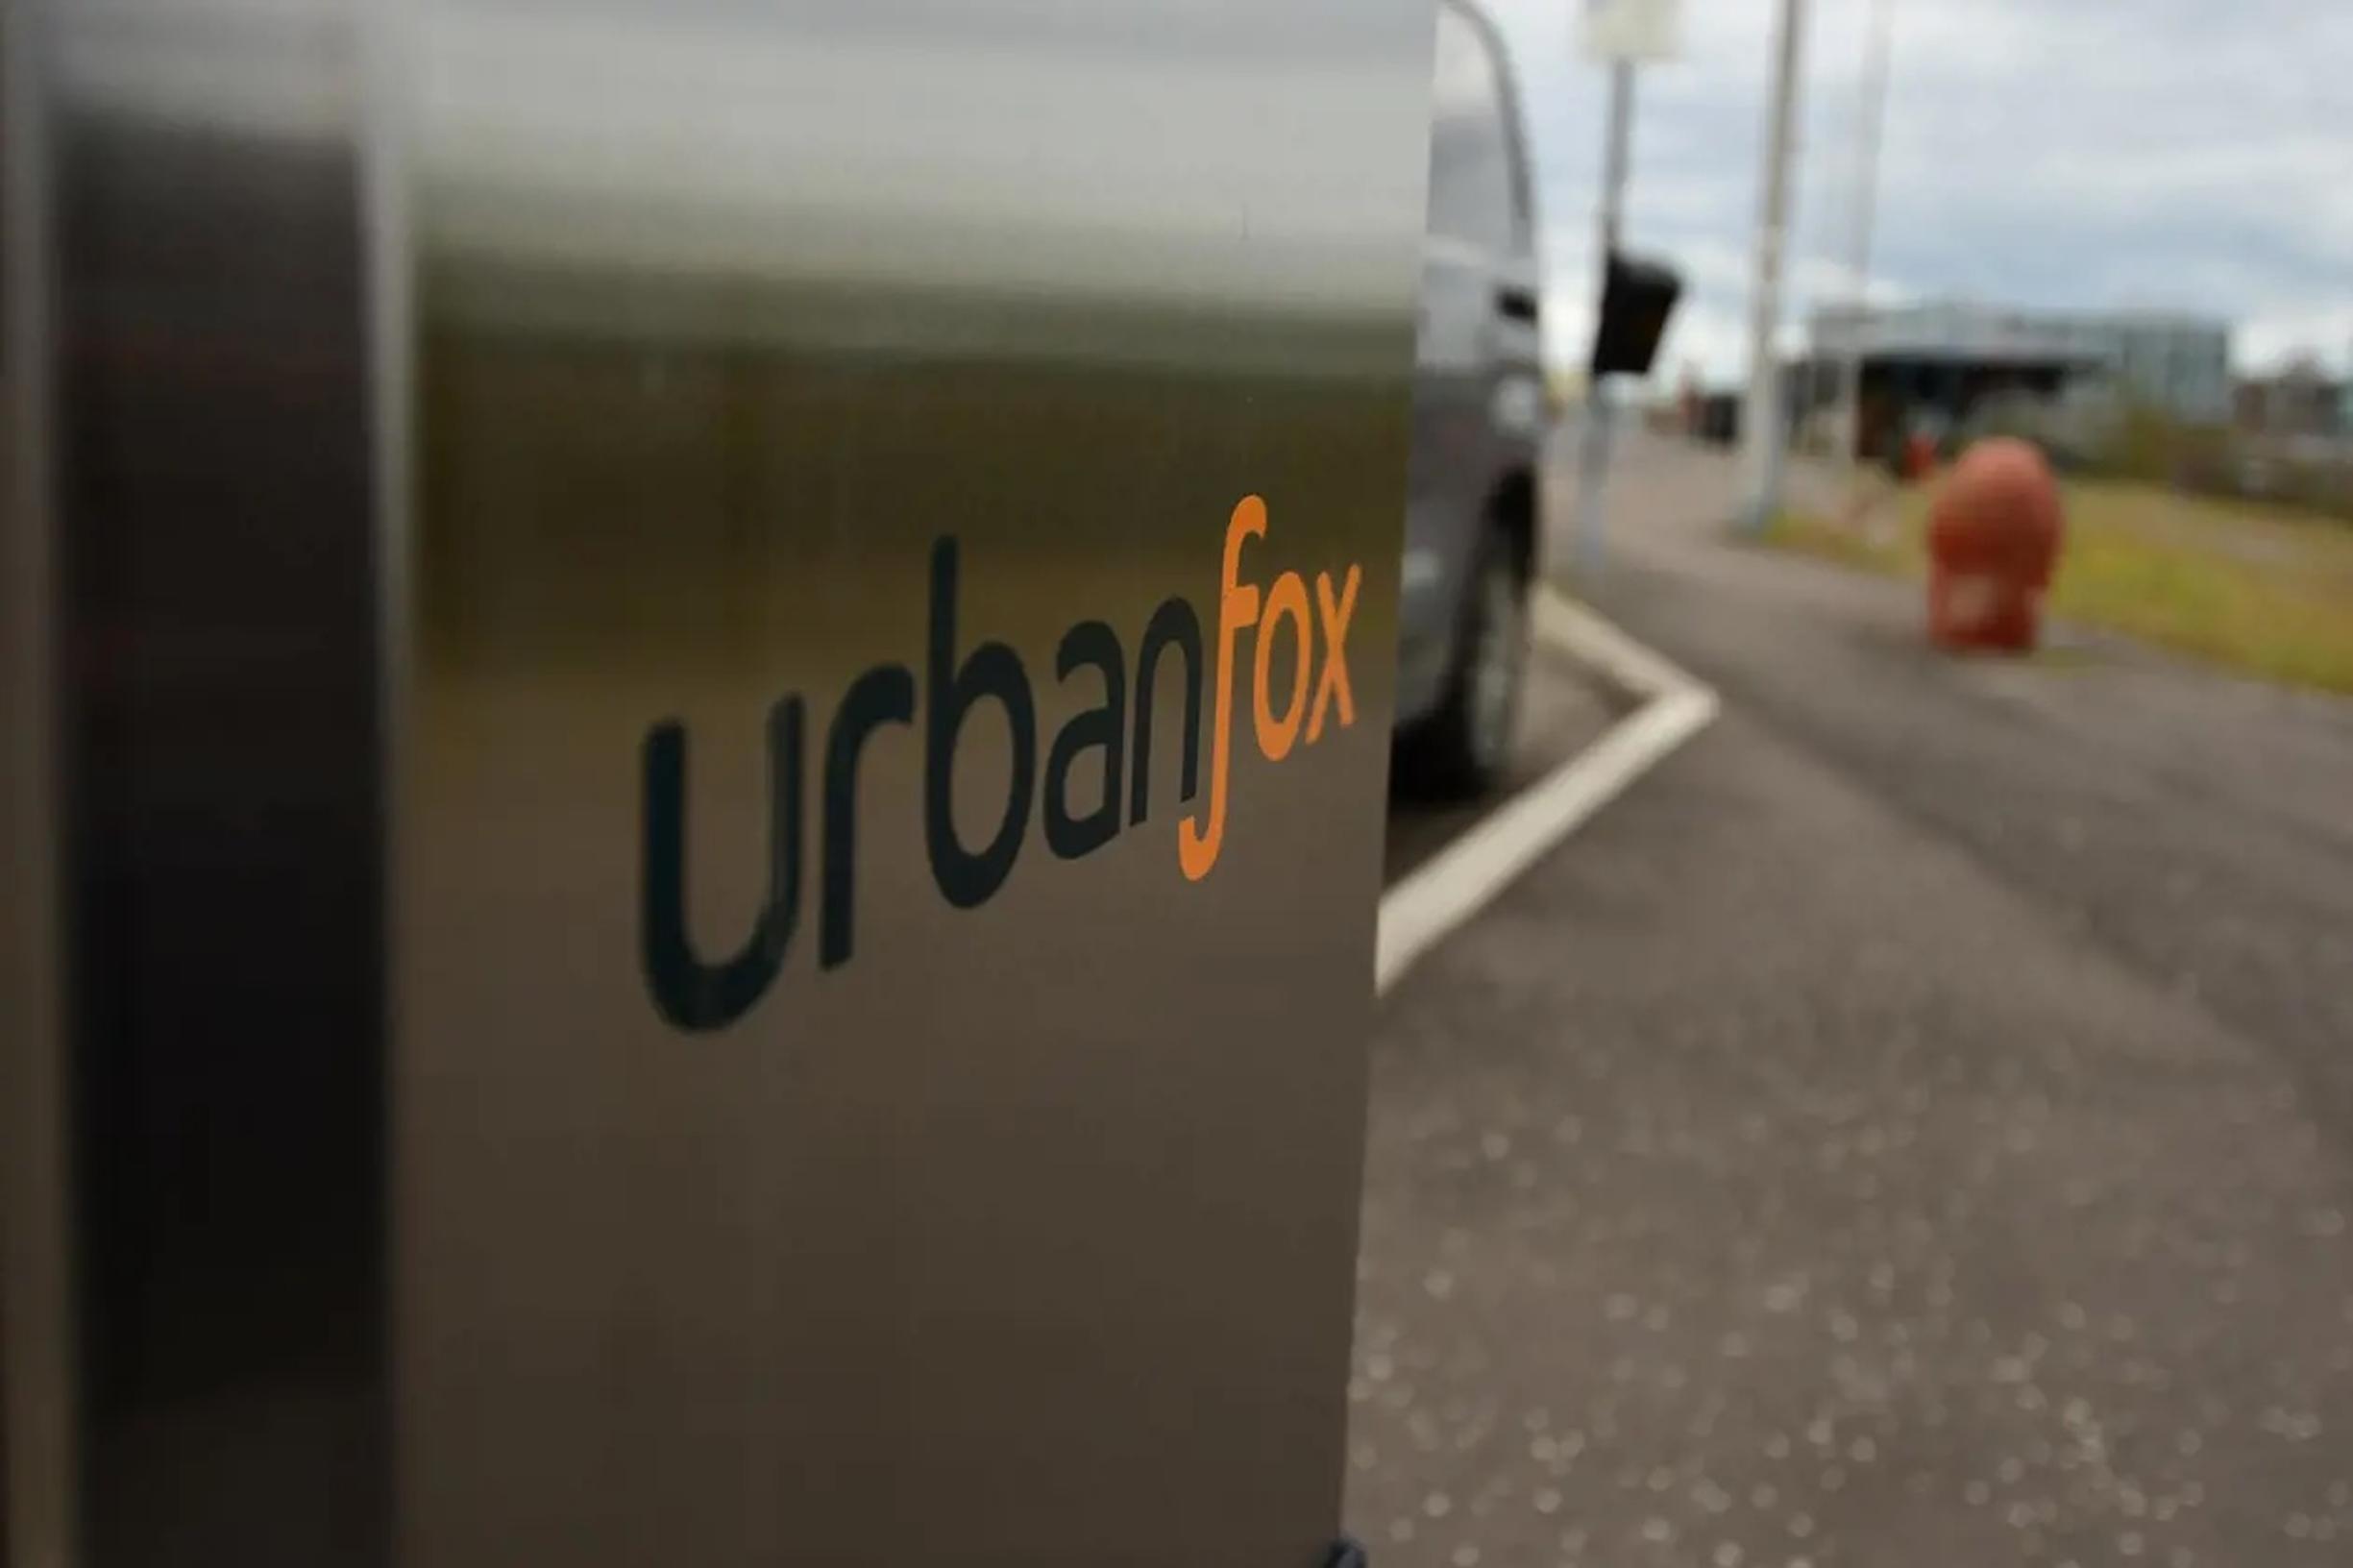 Urban Fox provides EV charging infrastructure for Balfour Beatty